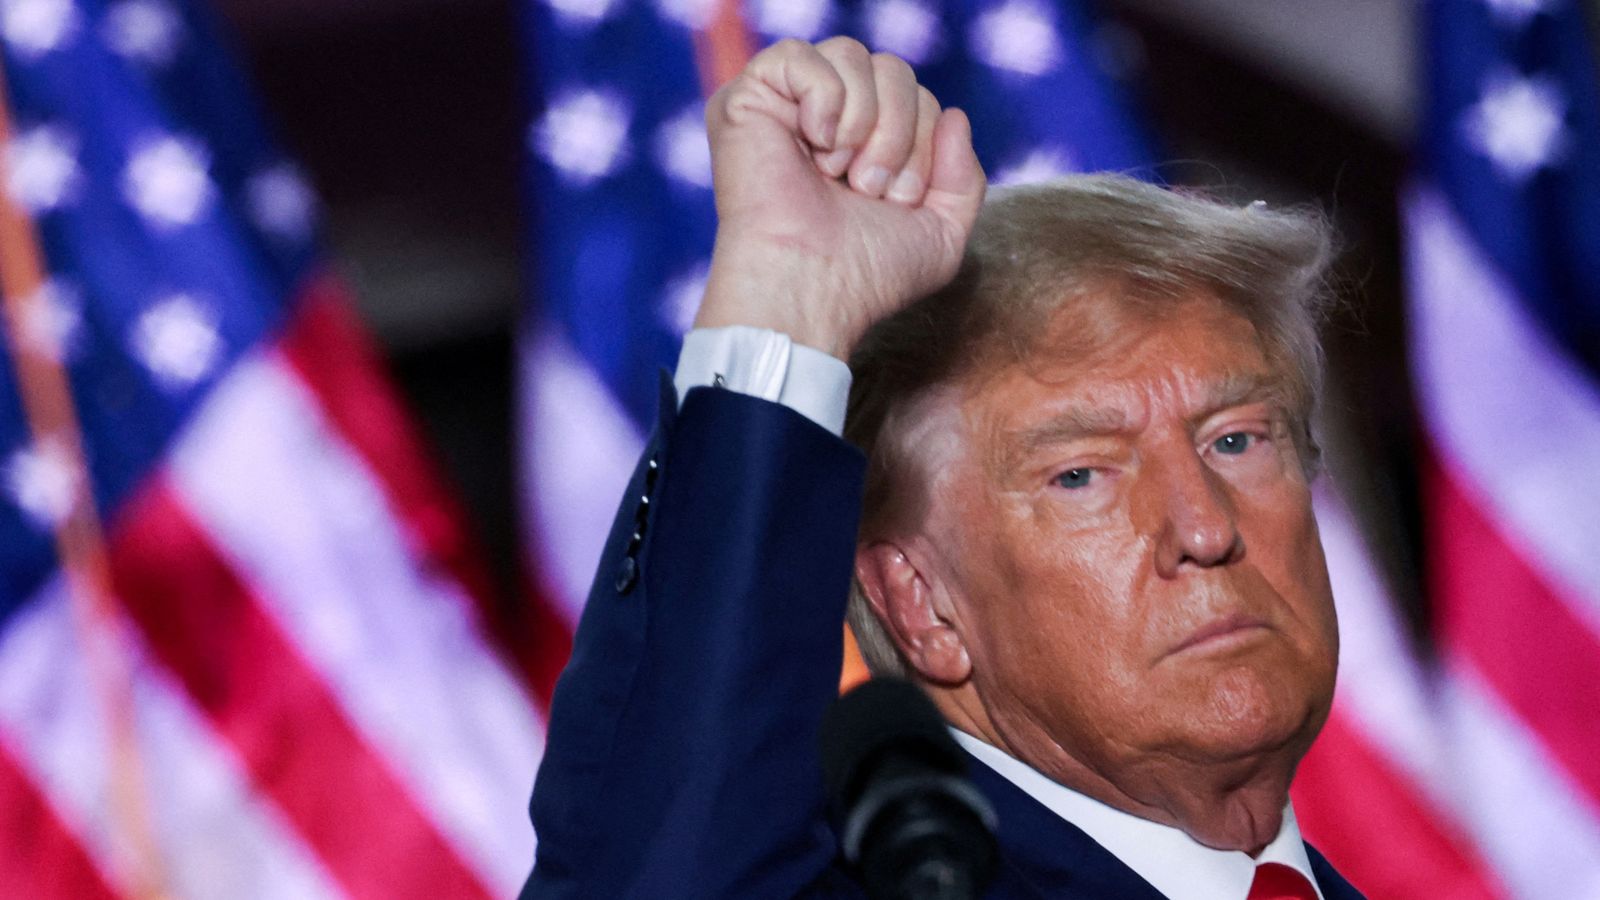 Donald Trump says he's expecting to face new charges over efforts to overturn 2020 election result